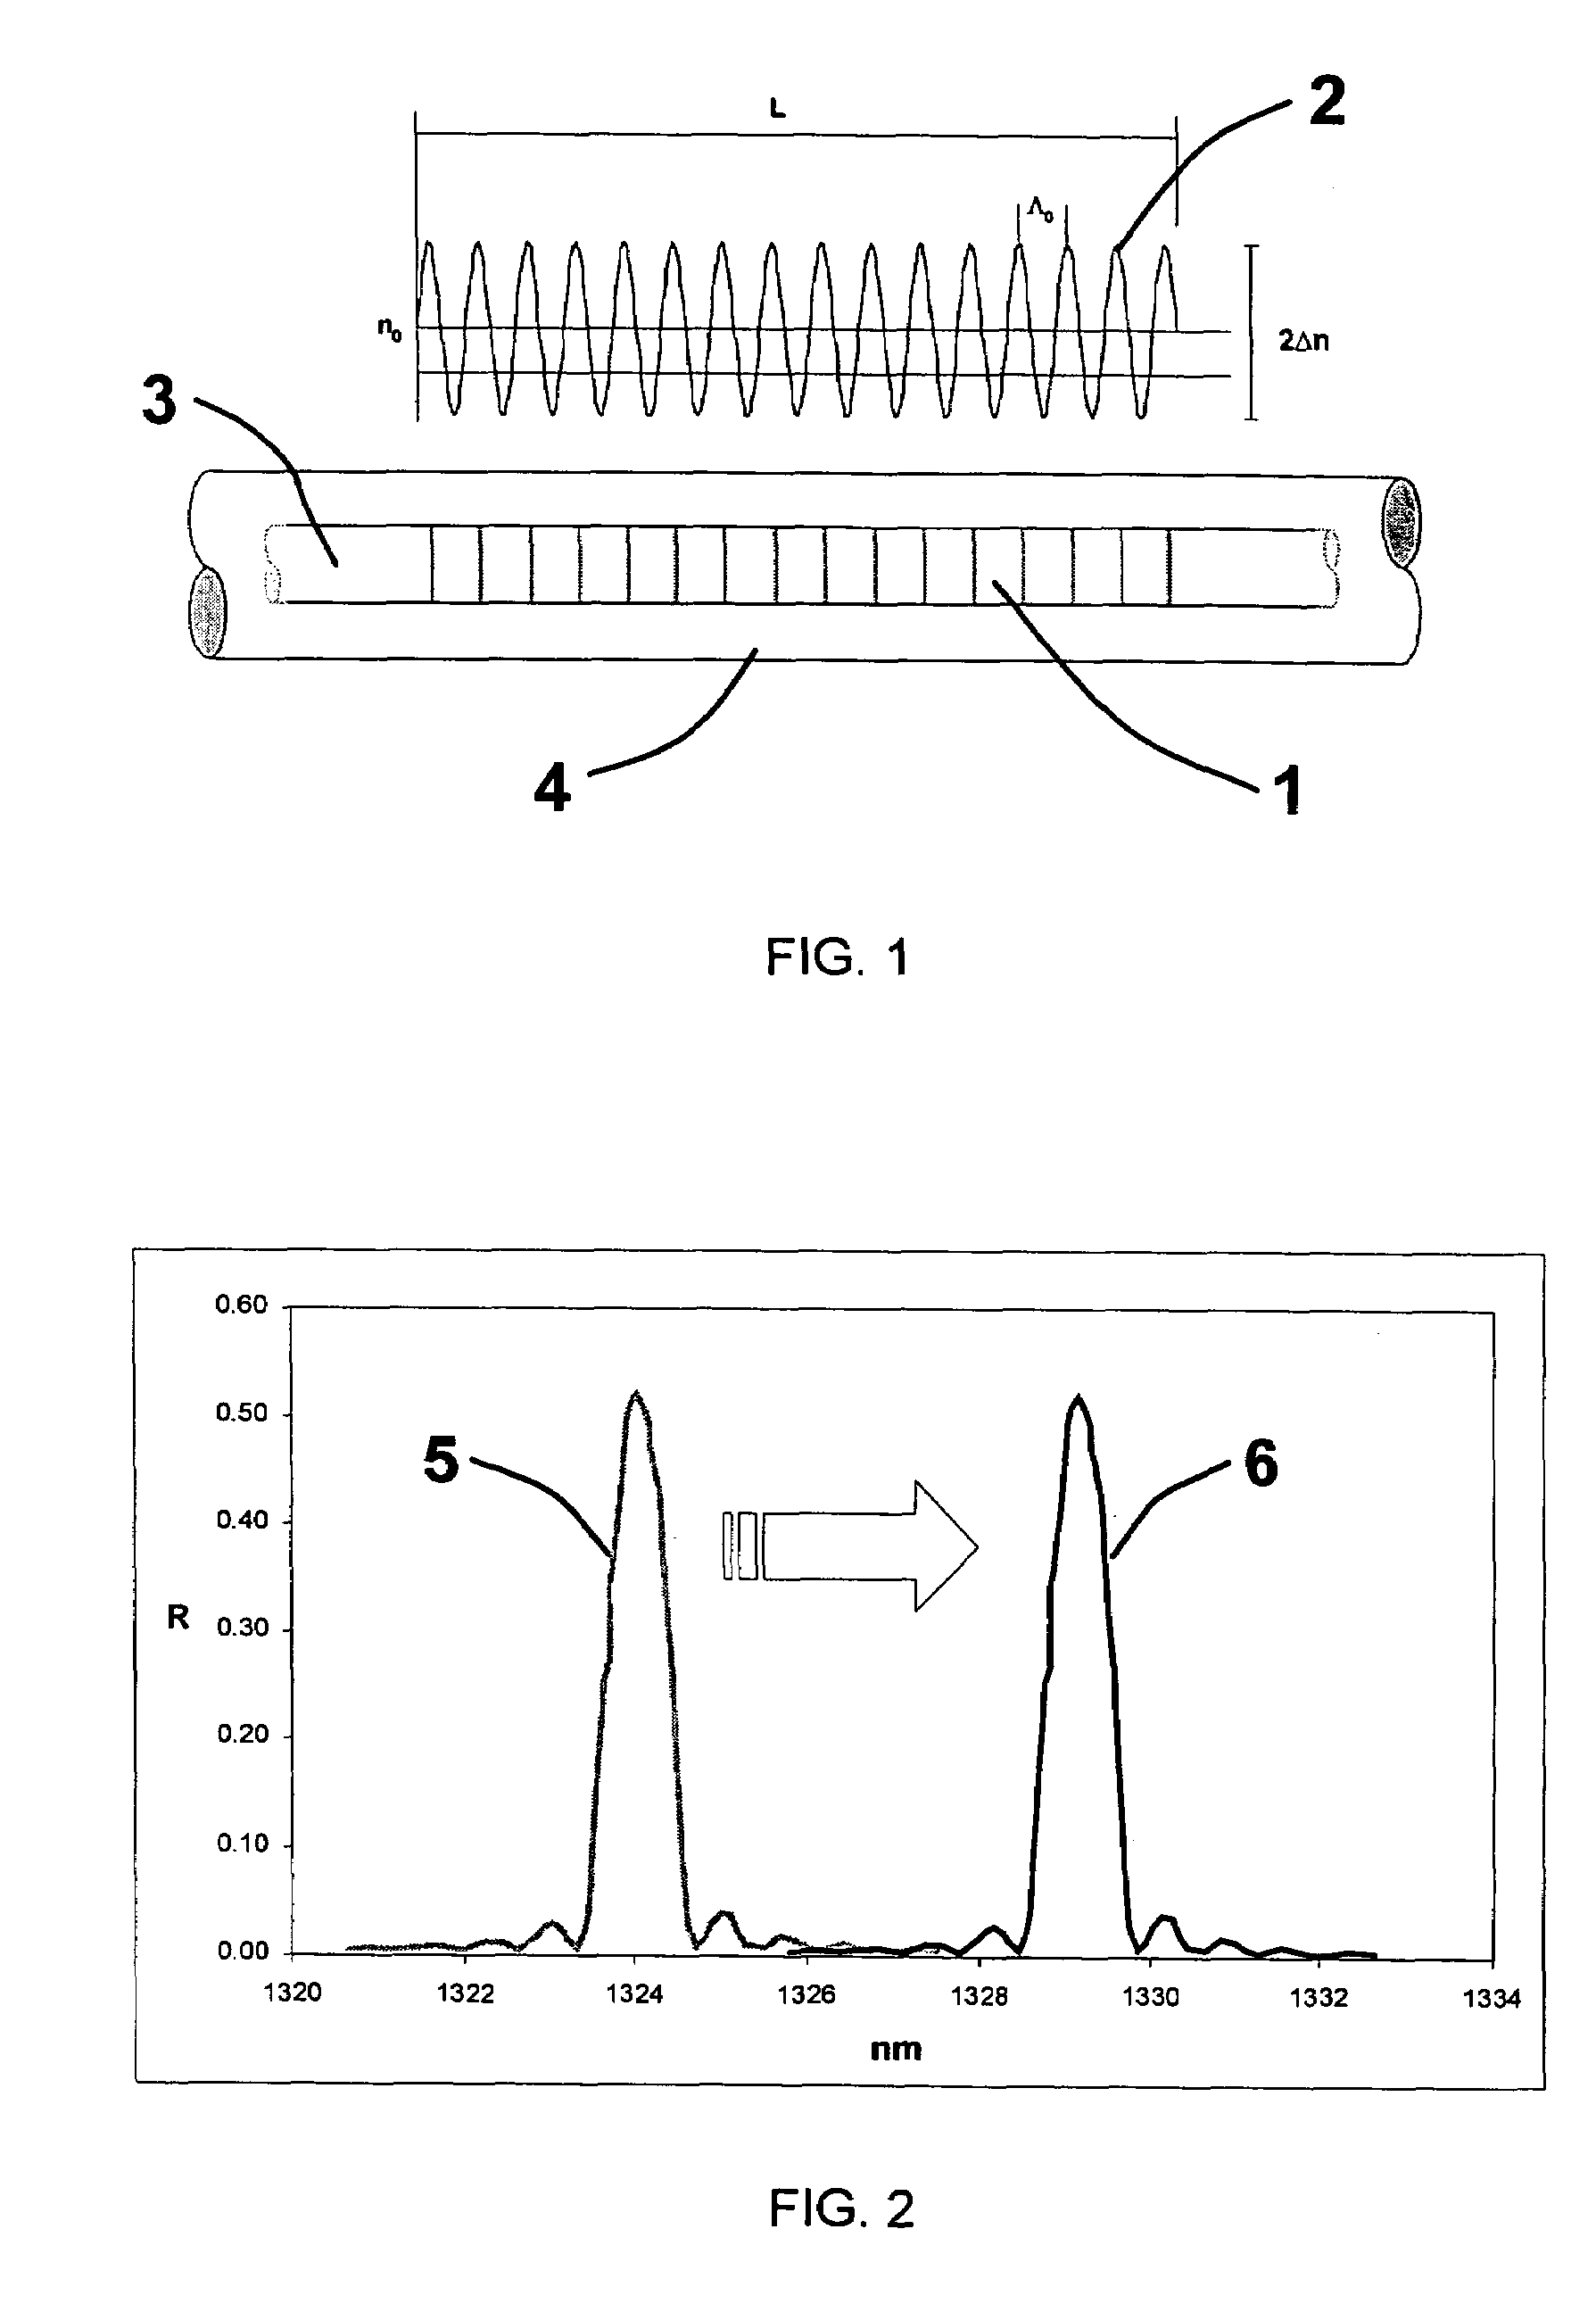 Method to monitor structural damage occurrence and progression in monolithic composite structures using fibre Bragg grating sensors